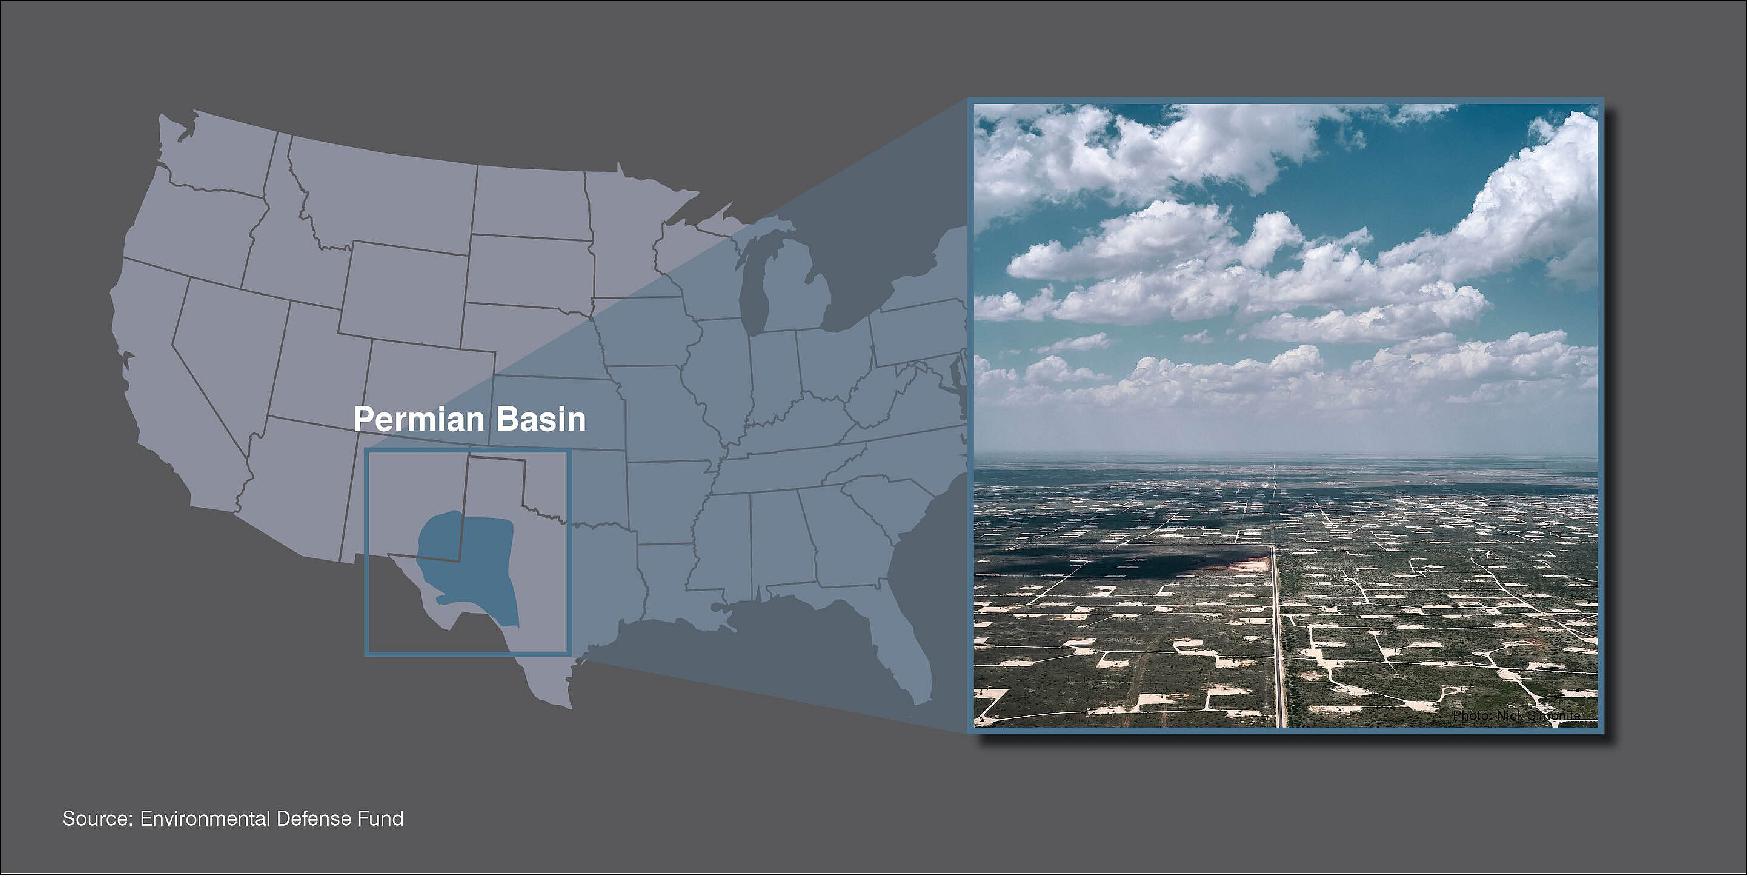 Figure 72: The Permian Basin is the largest oil field on the planet. Tens of thousands of wells dot the 86,000 square mile landscape that spans West Texas and Southeastern New Mexico [image credit: EDF (Environmental Defense Fund), Nick Simonite]